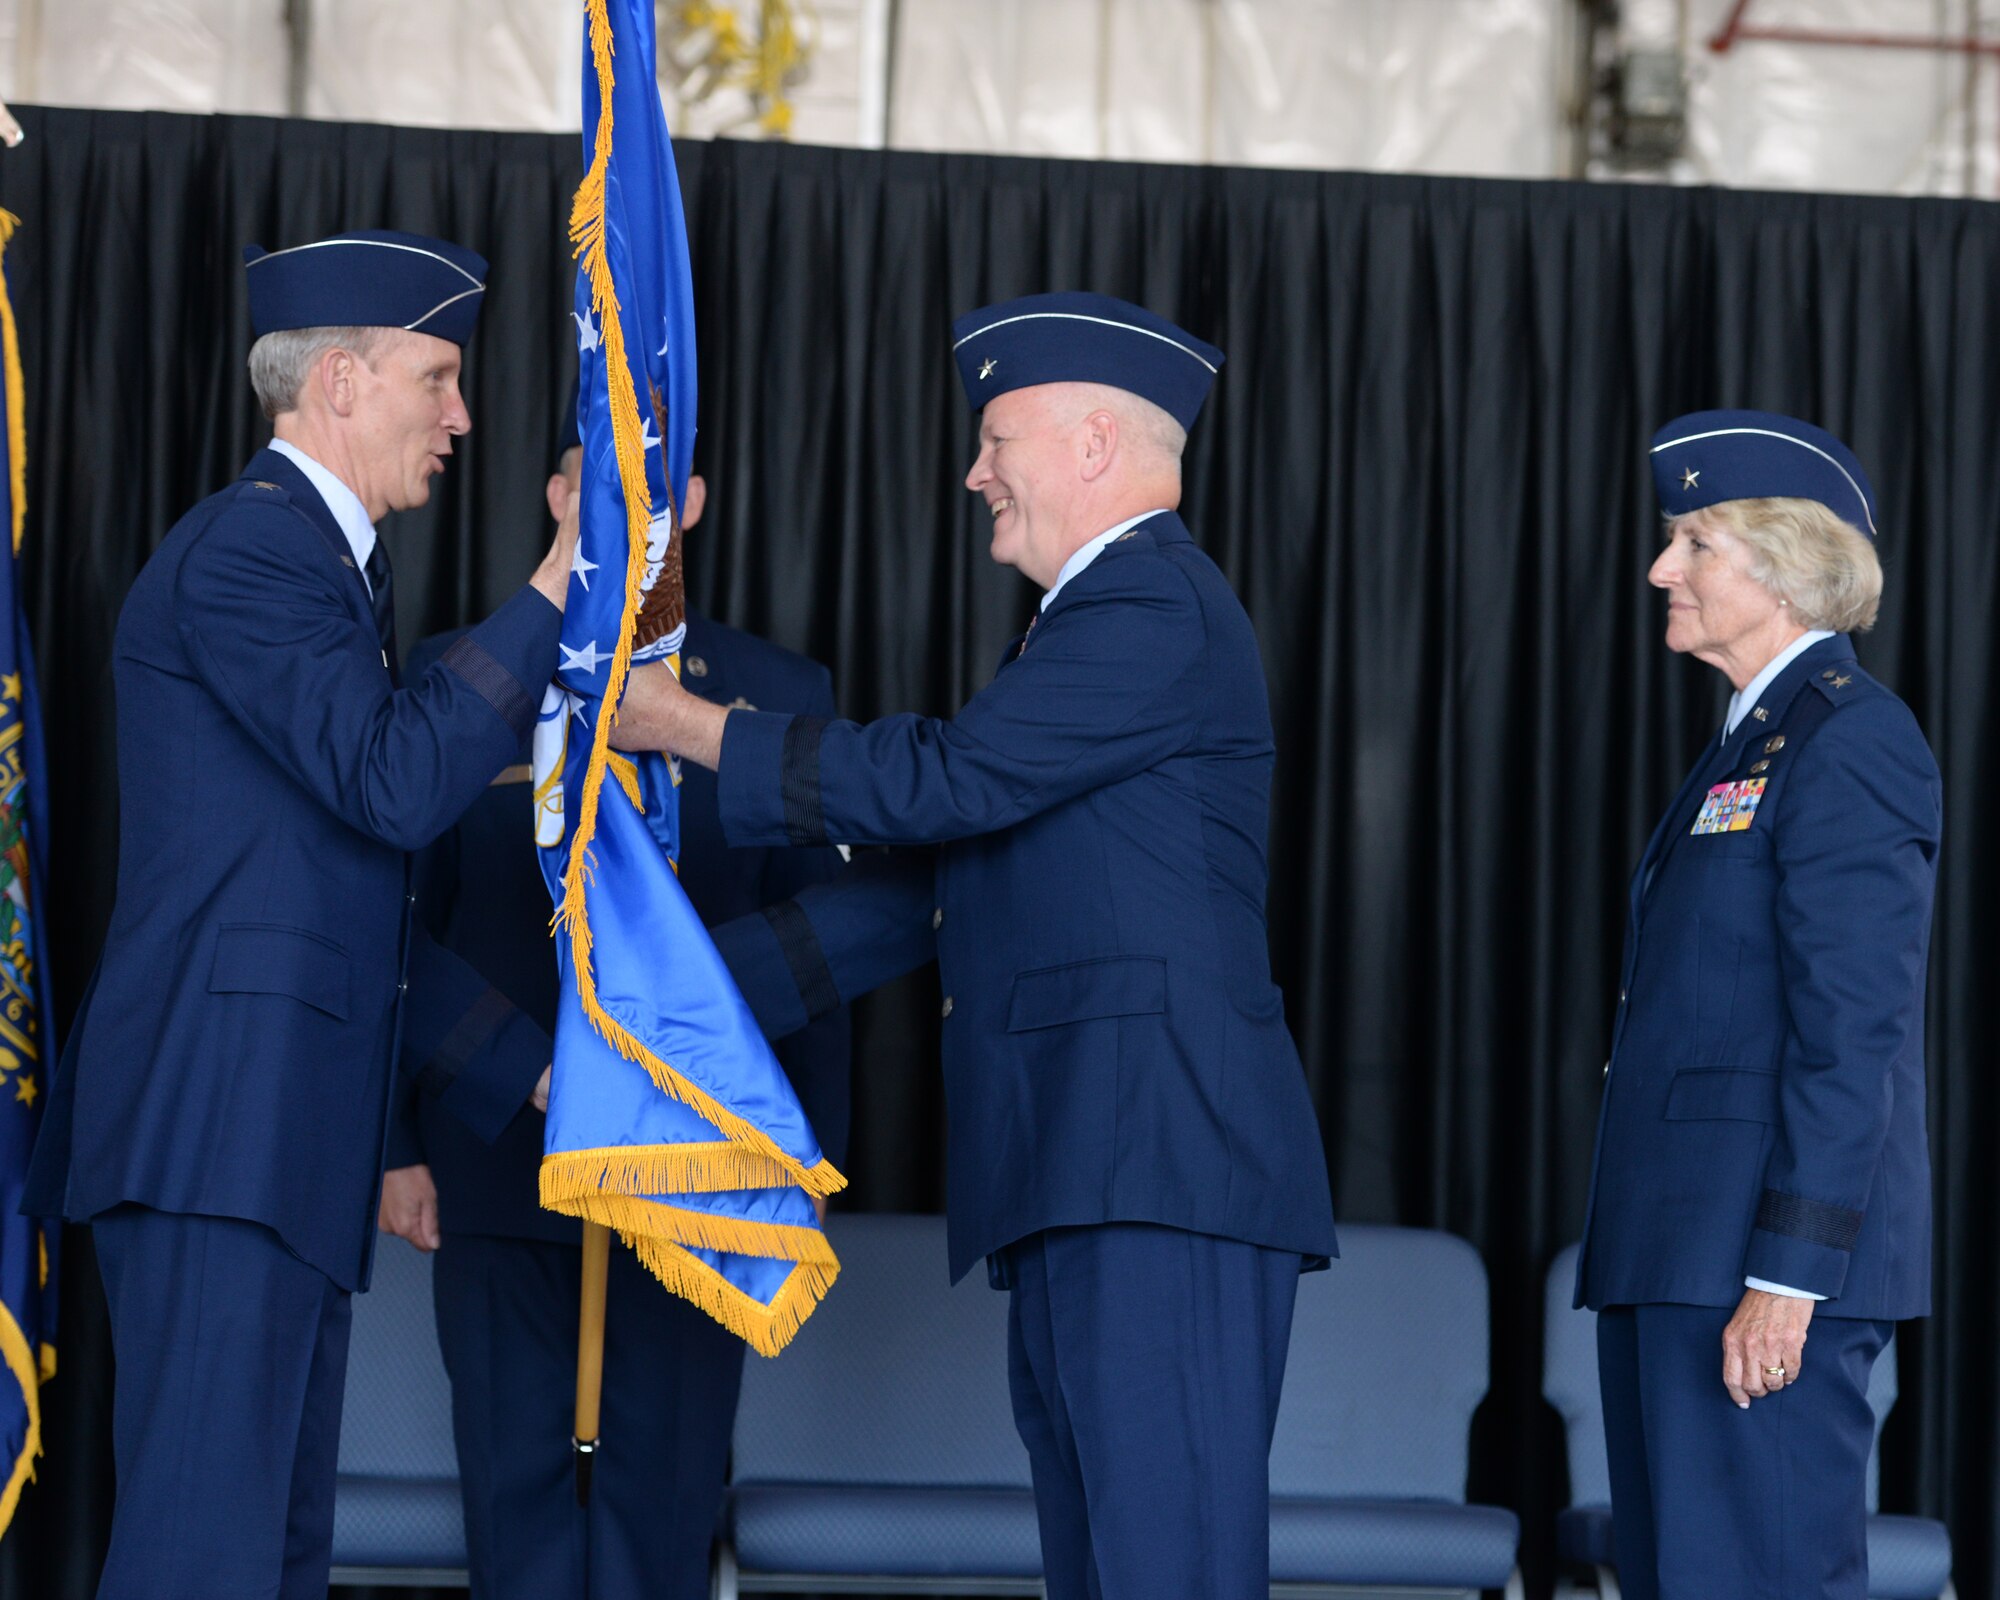 Brig. Gen. Paul Hutchinson receives a guidon from the Adjutant General, New Hampshire National Guard Maj. Gen. William N. Reddel III during a ceremony at Pease Air National Guard Base, N.H., on Aug. 9, 2015. Hutchinson assumed command of the NHANG from Brig. Gen. Carolyn J. Protzmann. (U.S. Air National Guard photo by Staff Sgt. Curtis J. Lenz)